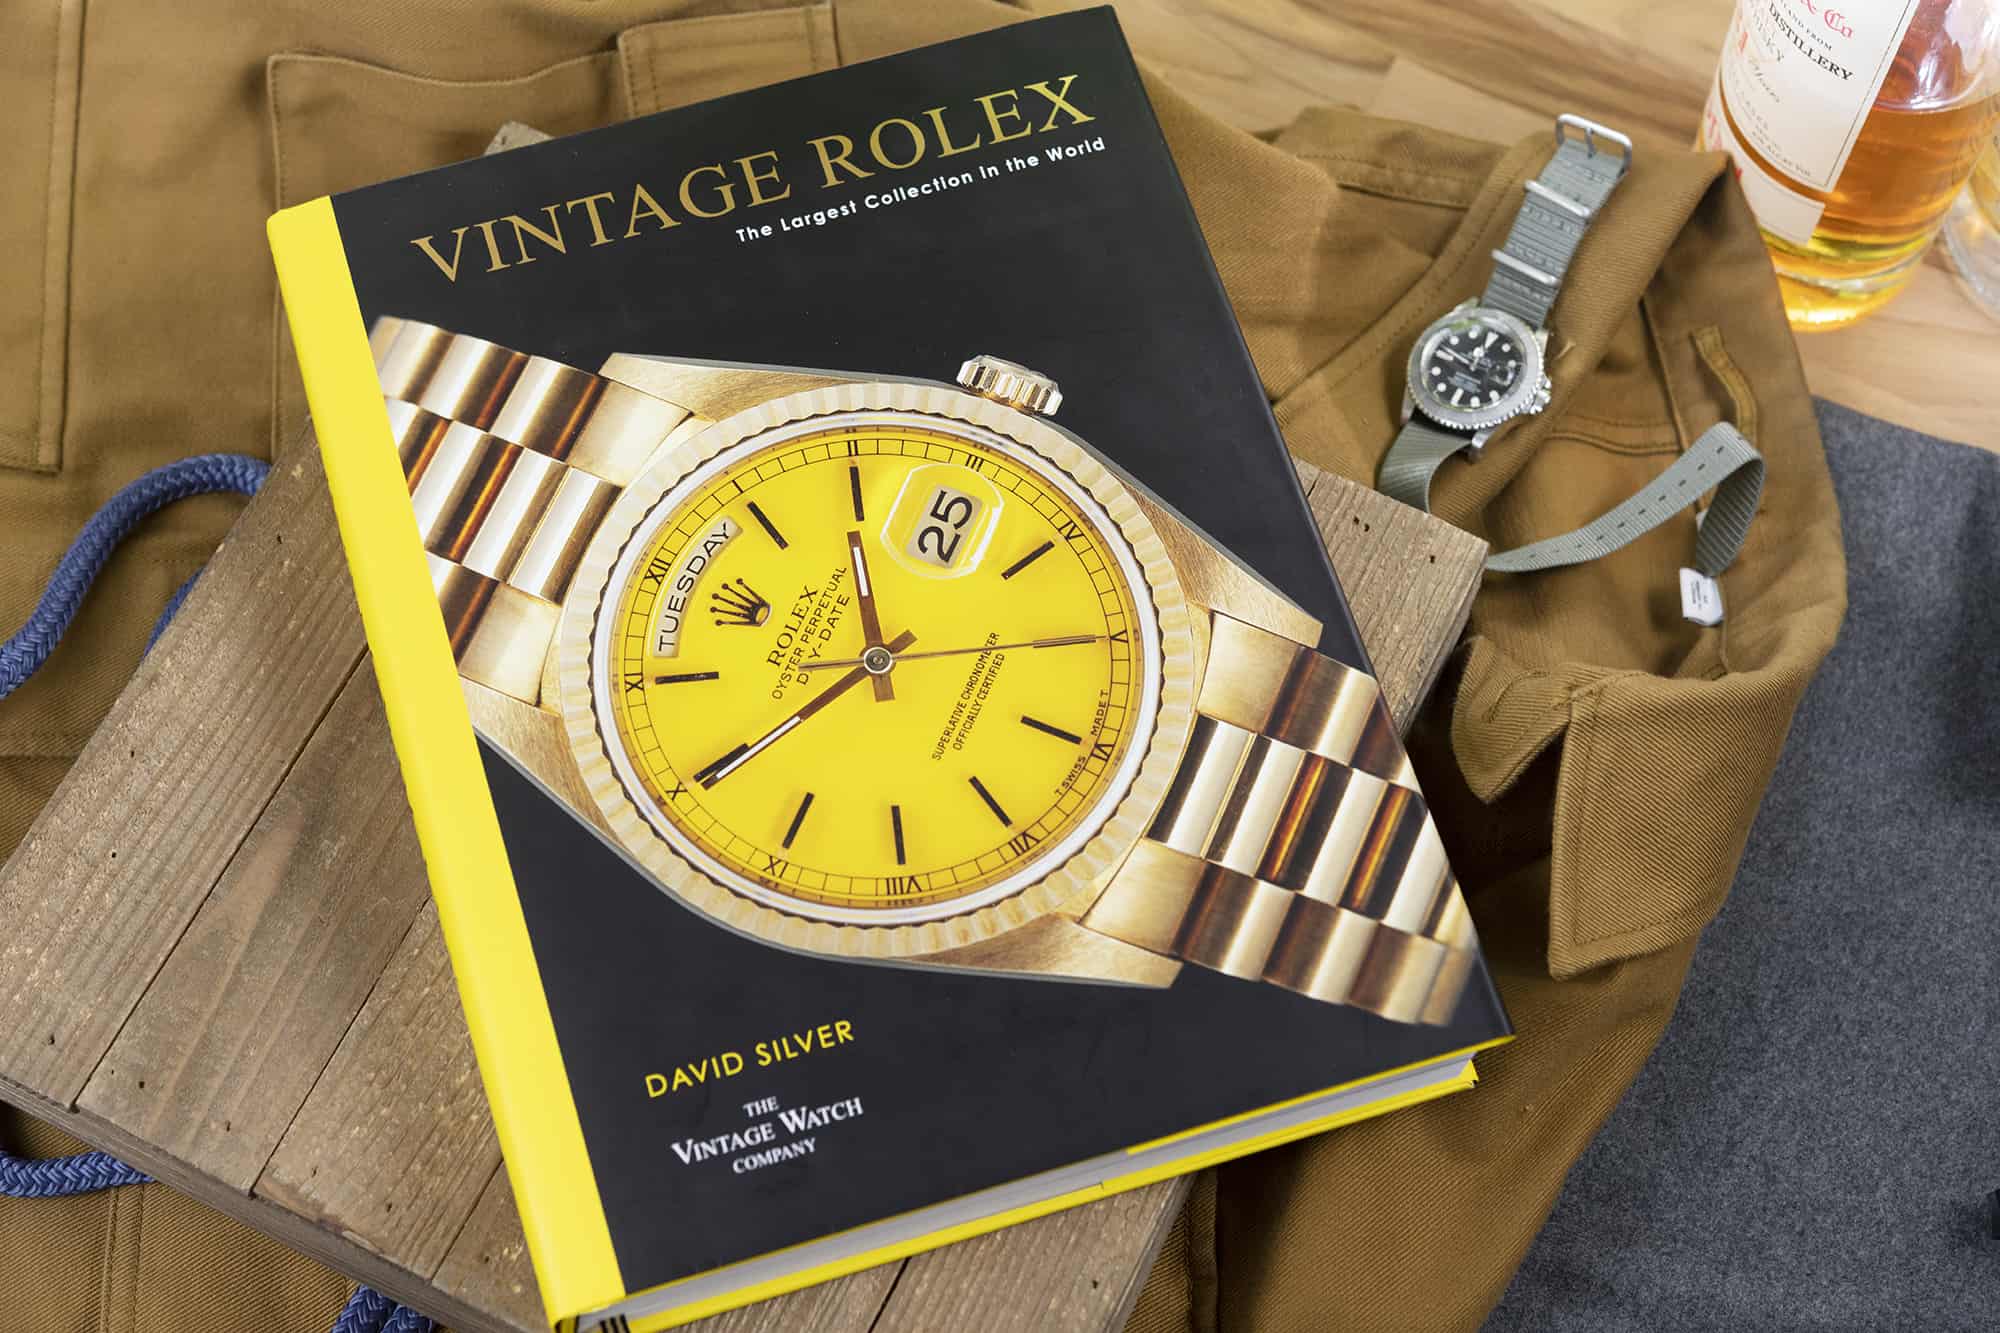 Book Review: Vintage Rolex, The Largest Collection In The World